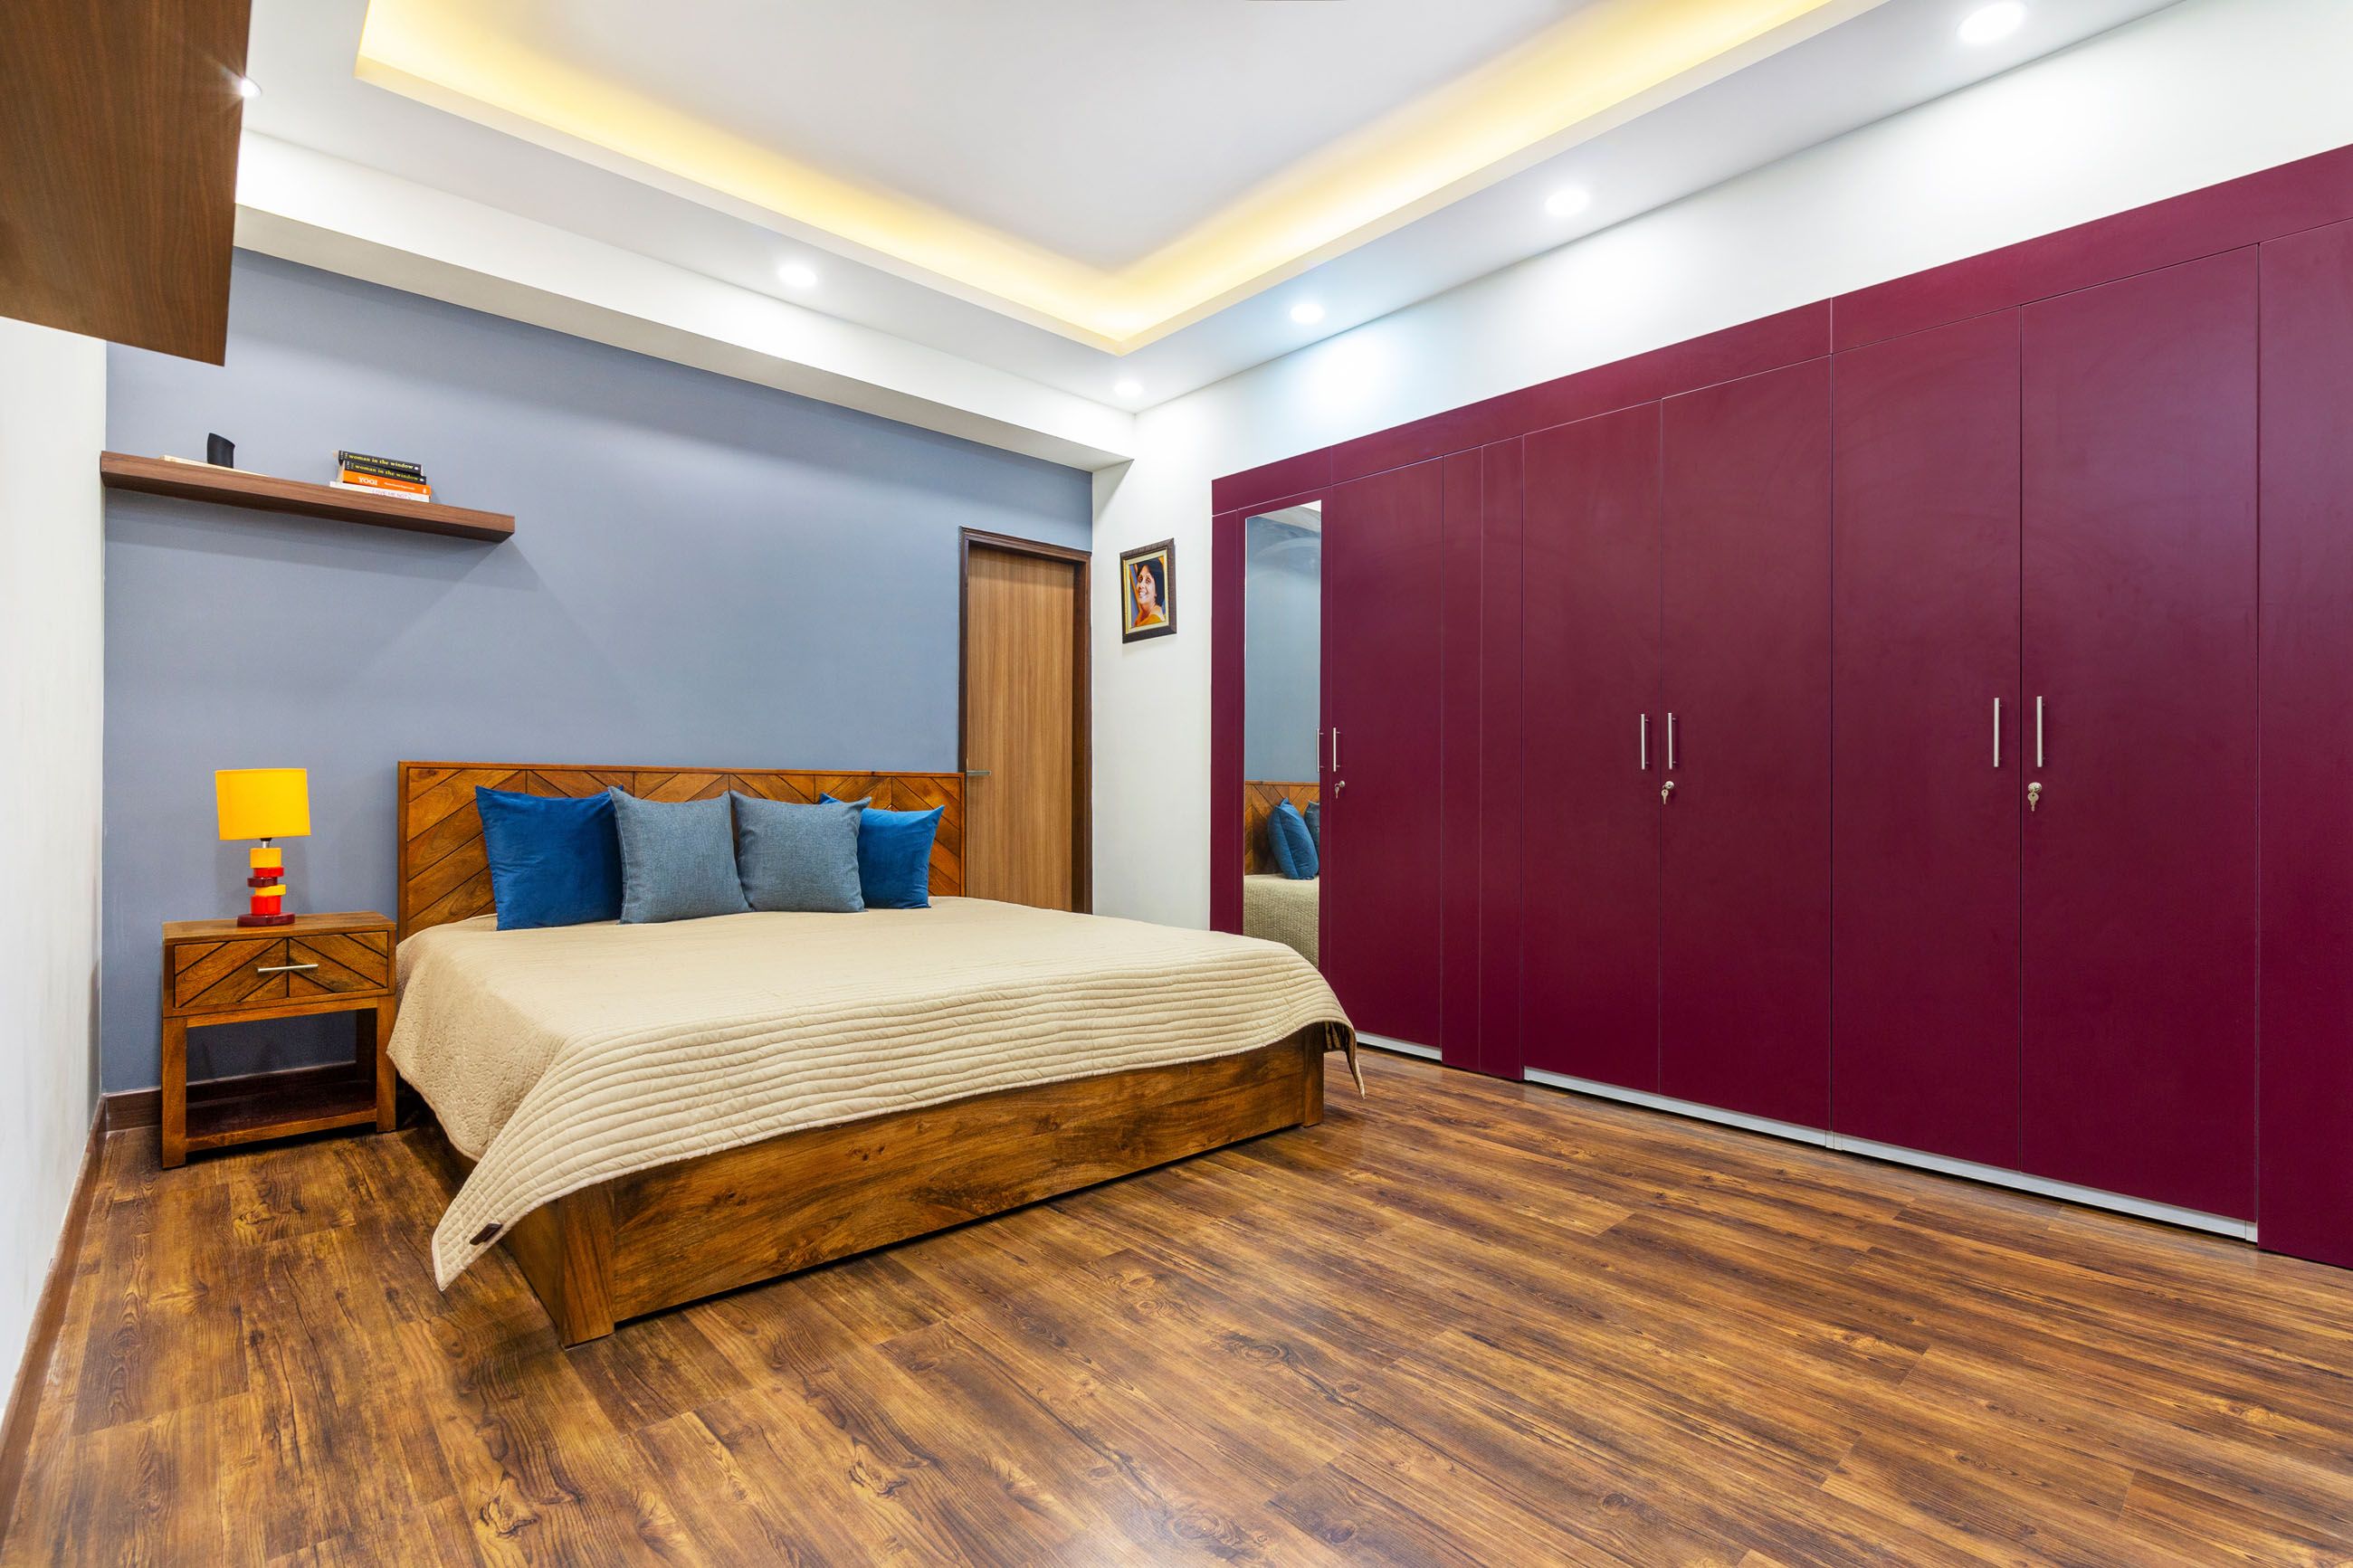 Contemporary 2-BHK Flat In Noida With Colourful Wardrobe Units